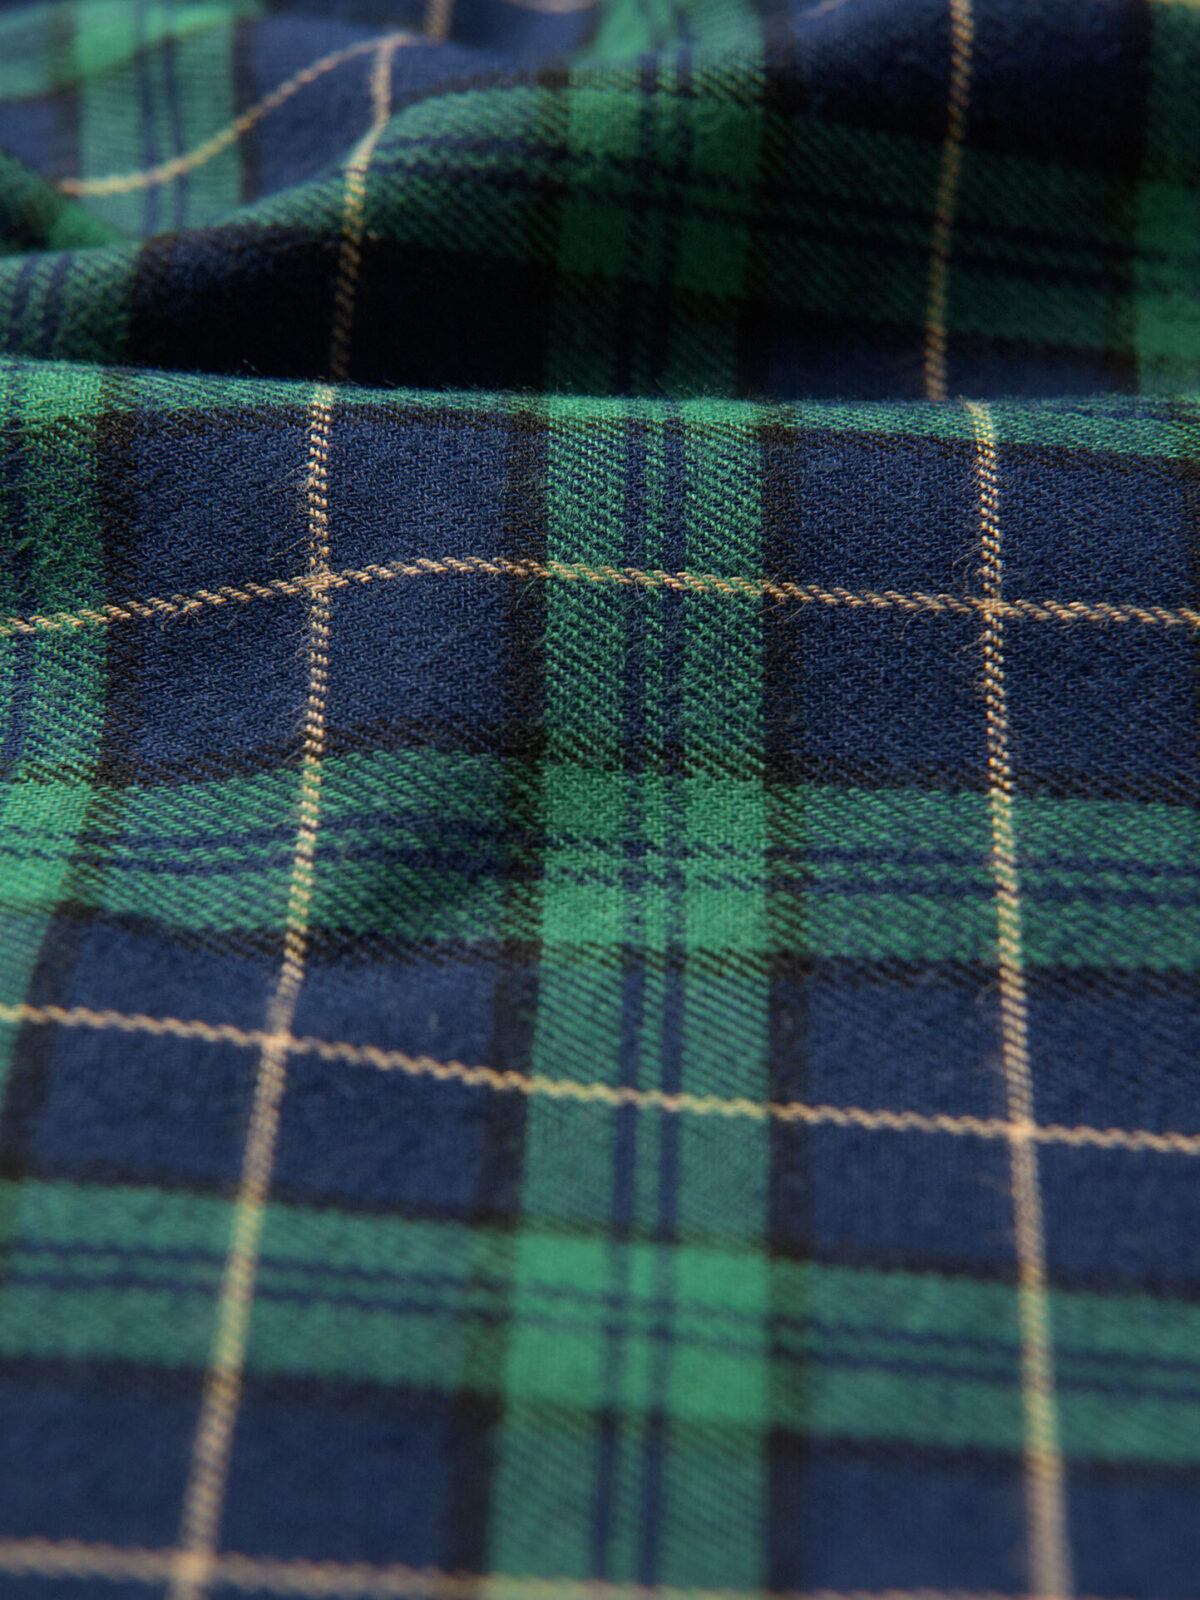 Green and Navy Tartan Flannel Shirts by Proper Cloth